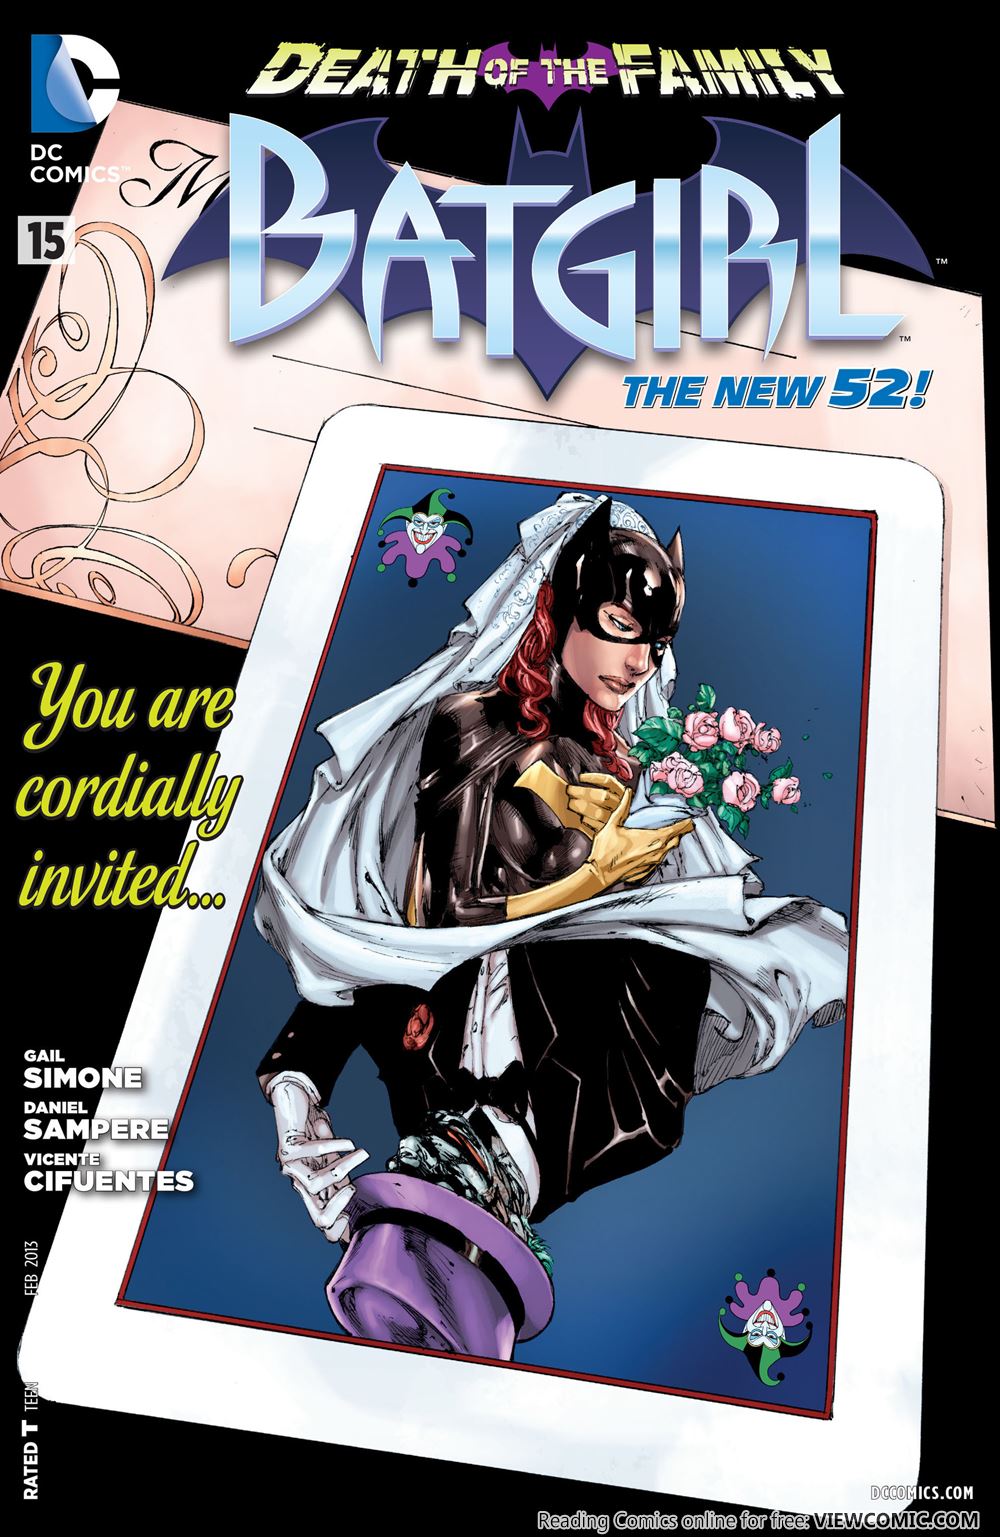 Death Of The Family 18 Batgirl 015 | Read Death Of The Family 18 Batgirl  015 comic online in high quality. Read Full Comic online for free - Read  comics online in high quality .| READ COMIC ONLINE